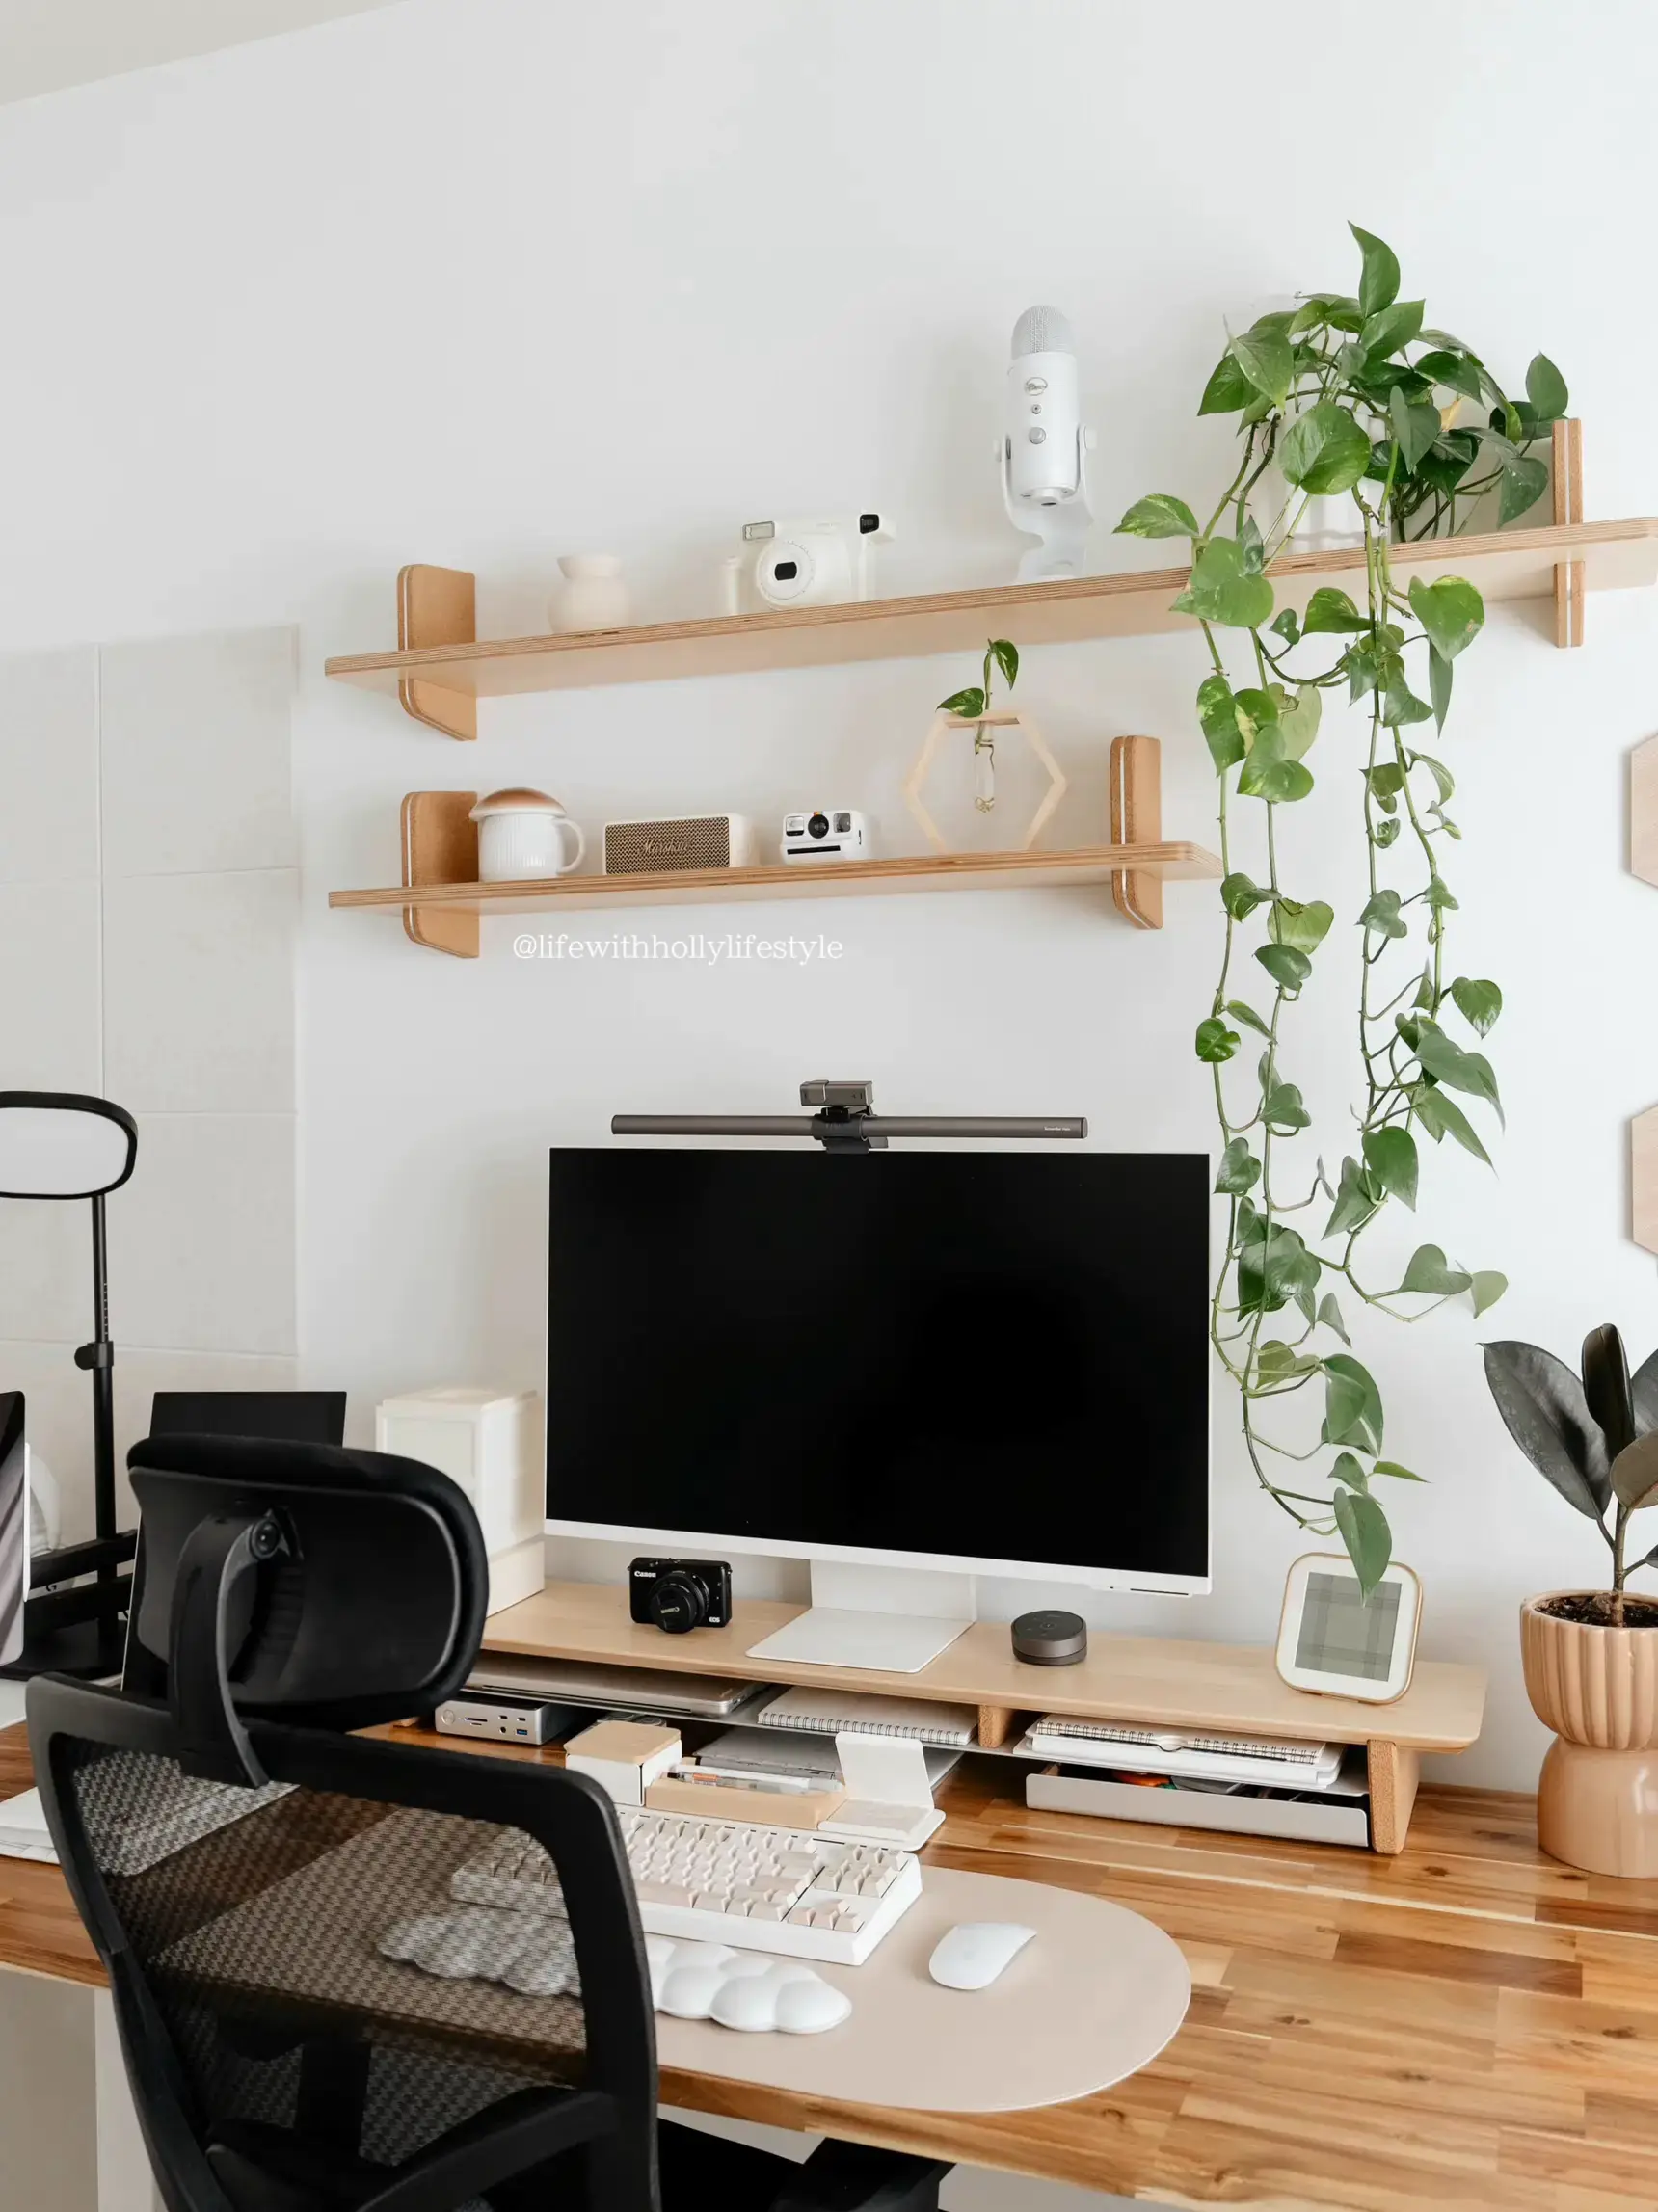 aesthetic & functional office setup, Gallery posted by kaeli mae